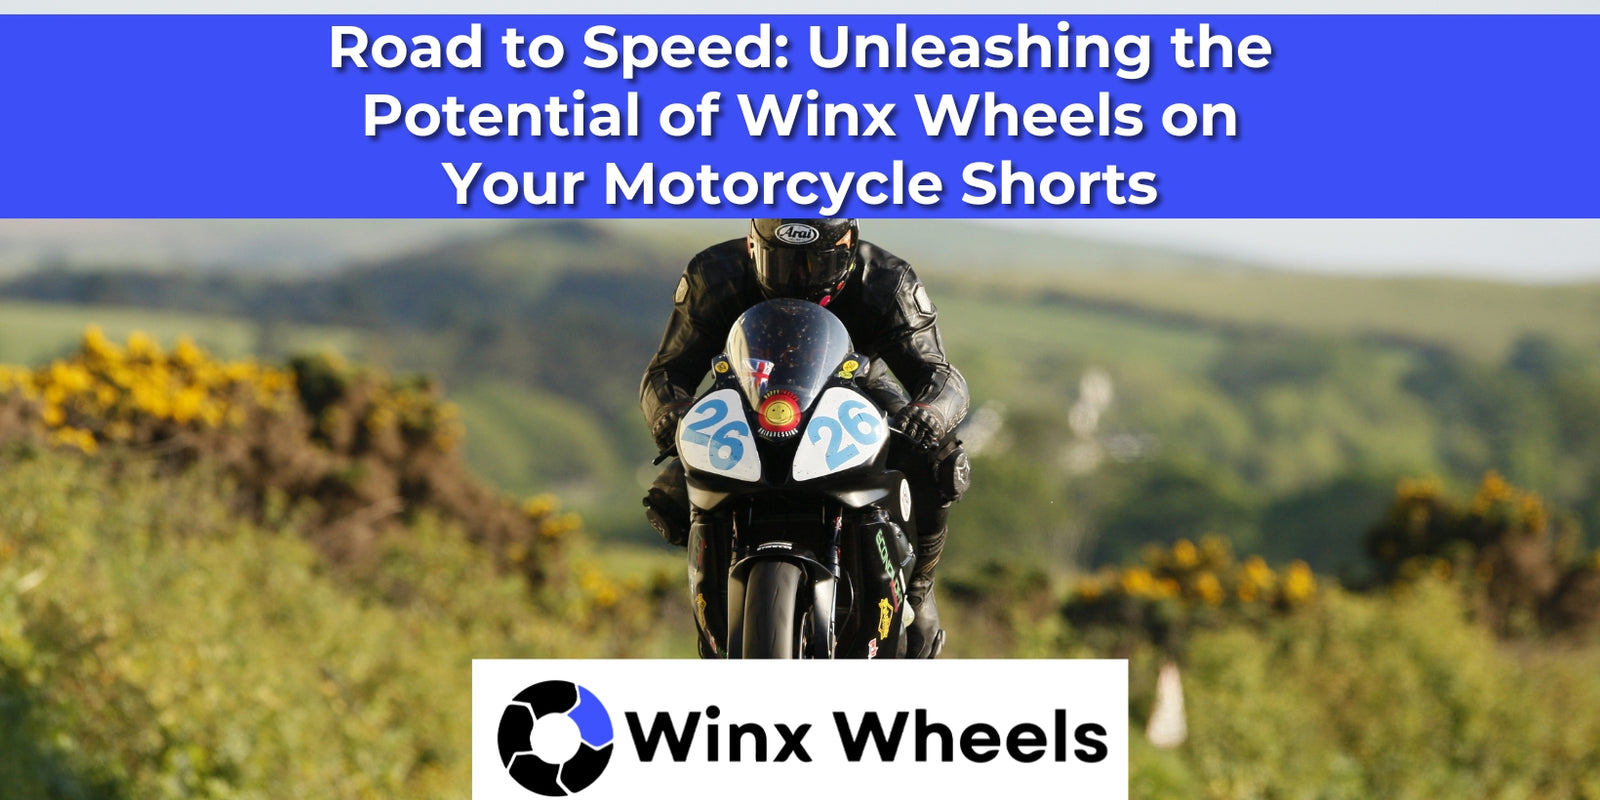 Road to Speed: Unleashing the Potential of Winx Wheels on Your Motorcycle Shorts